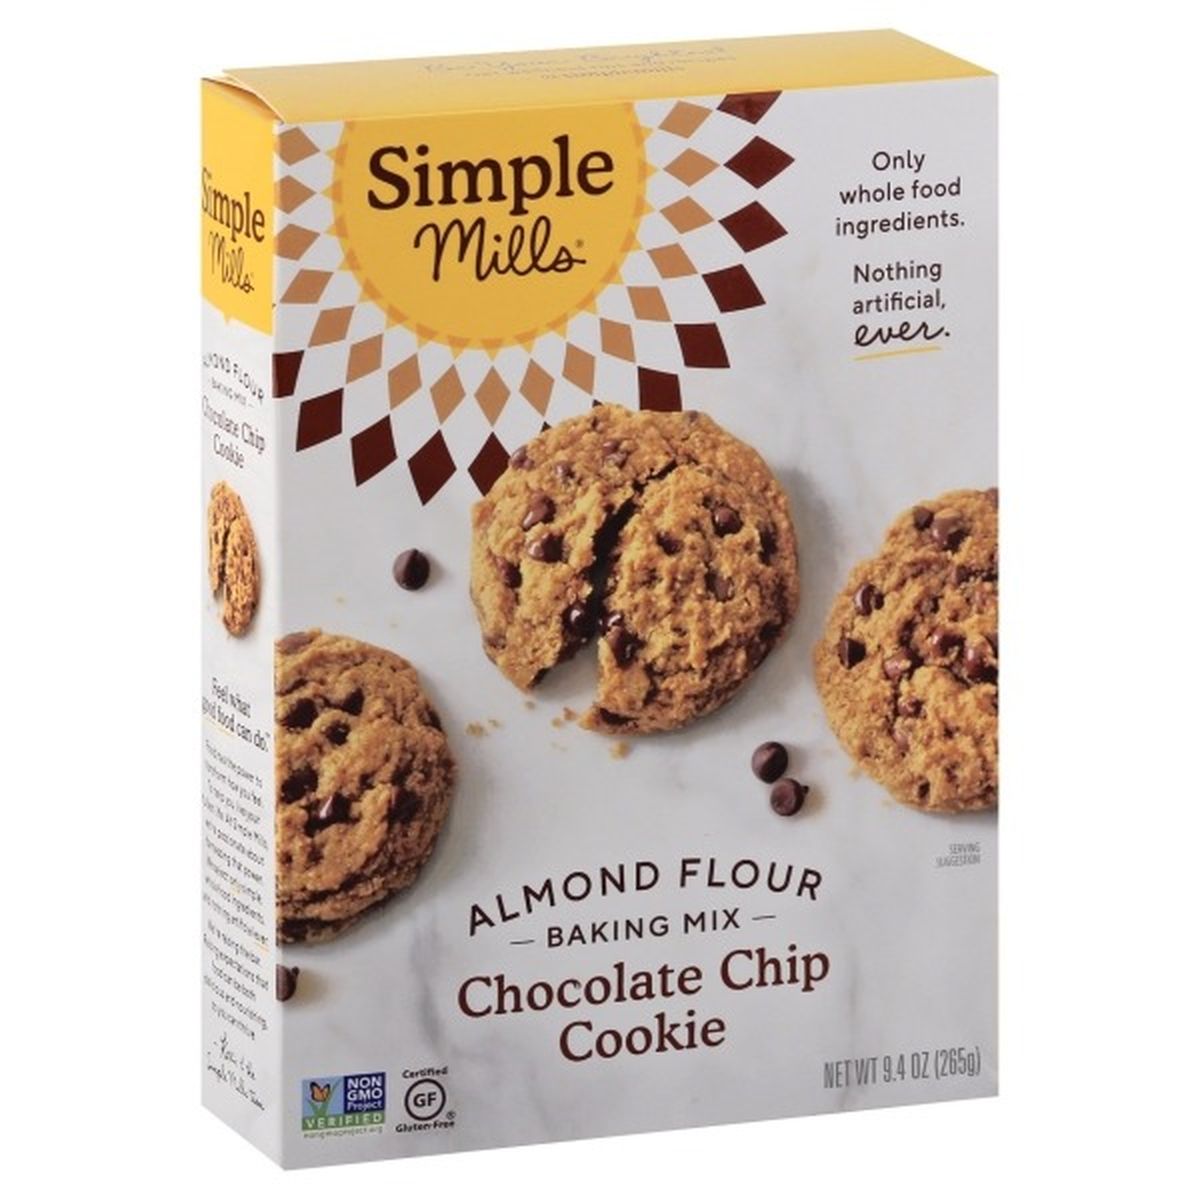 Calories in Simple Mills Baking Mix, Almond Flour, Chocolate Chip Cookie